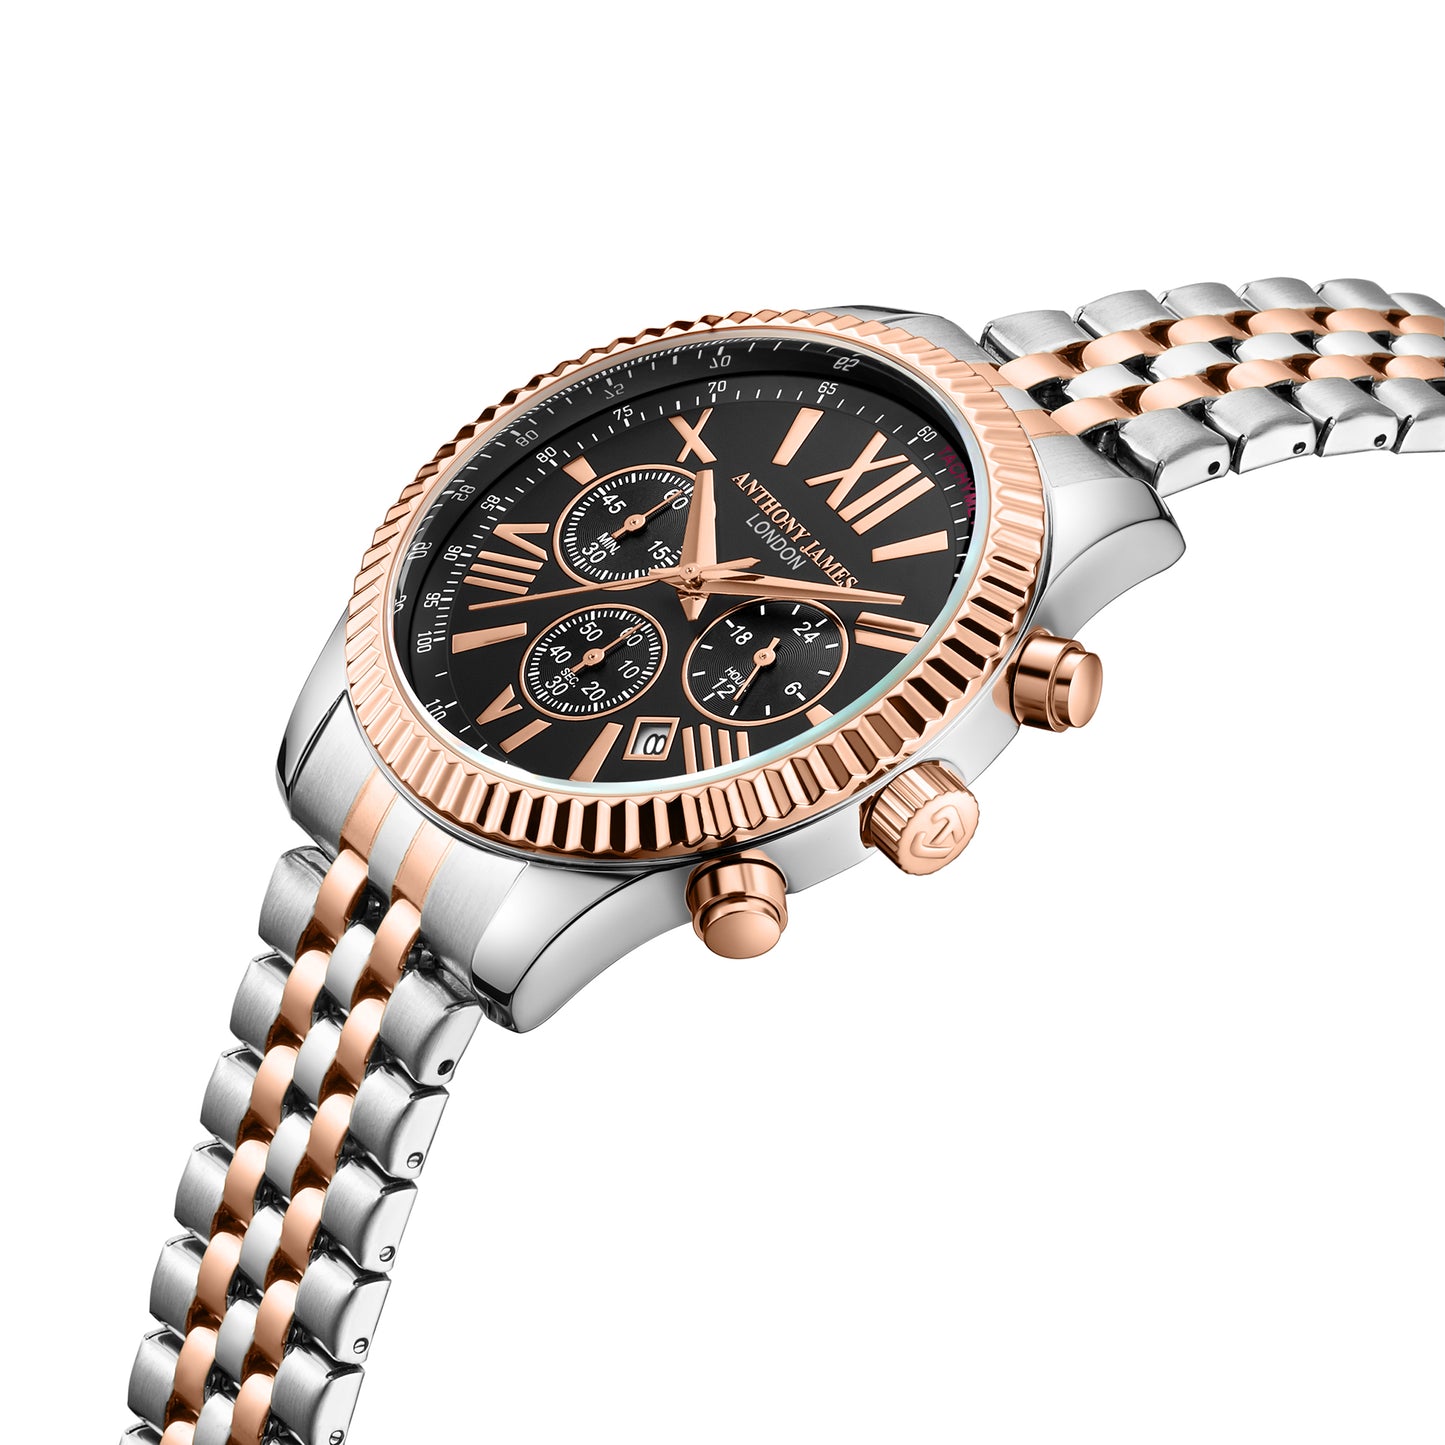 Limited Edition Chrono Sports Two Tone